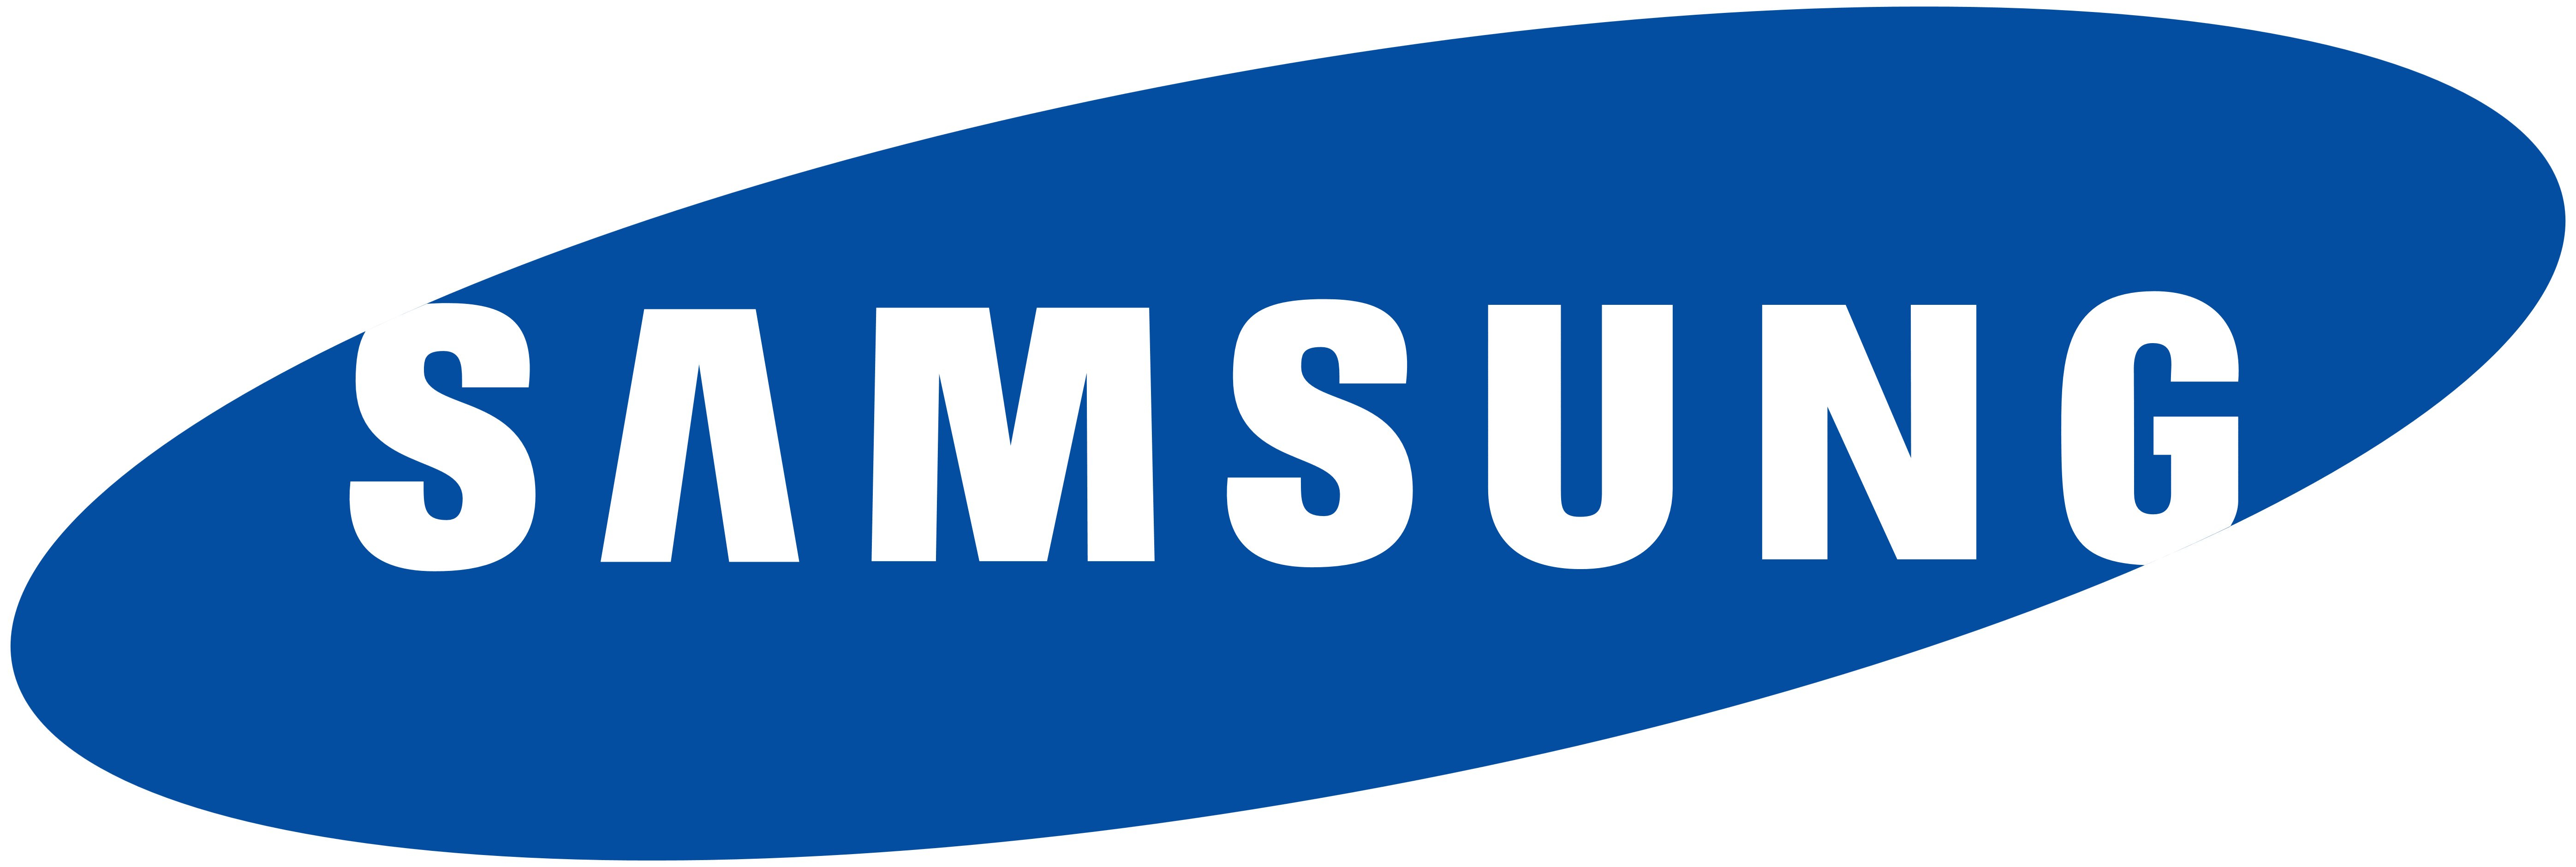 New Samsung 2017 Logo - Samsung Logo, Samsung Symbol, Meaning, History and Evolution